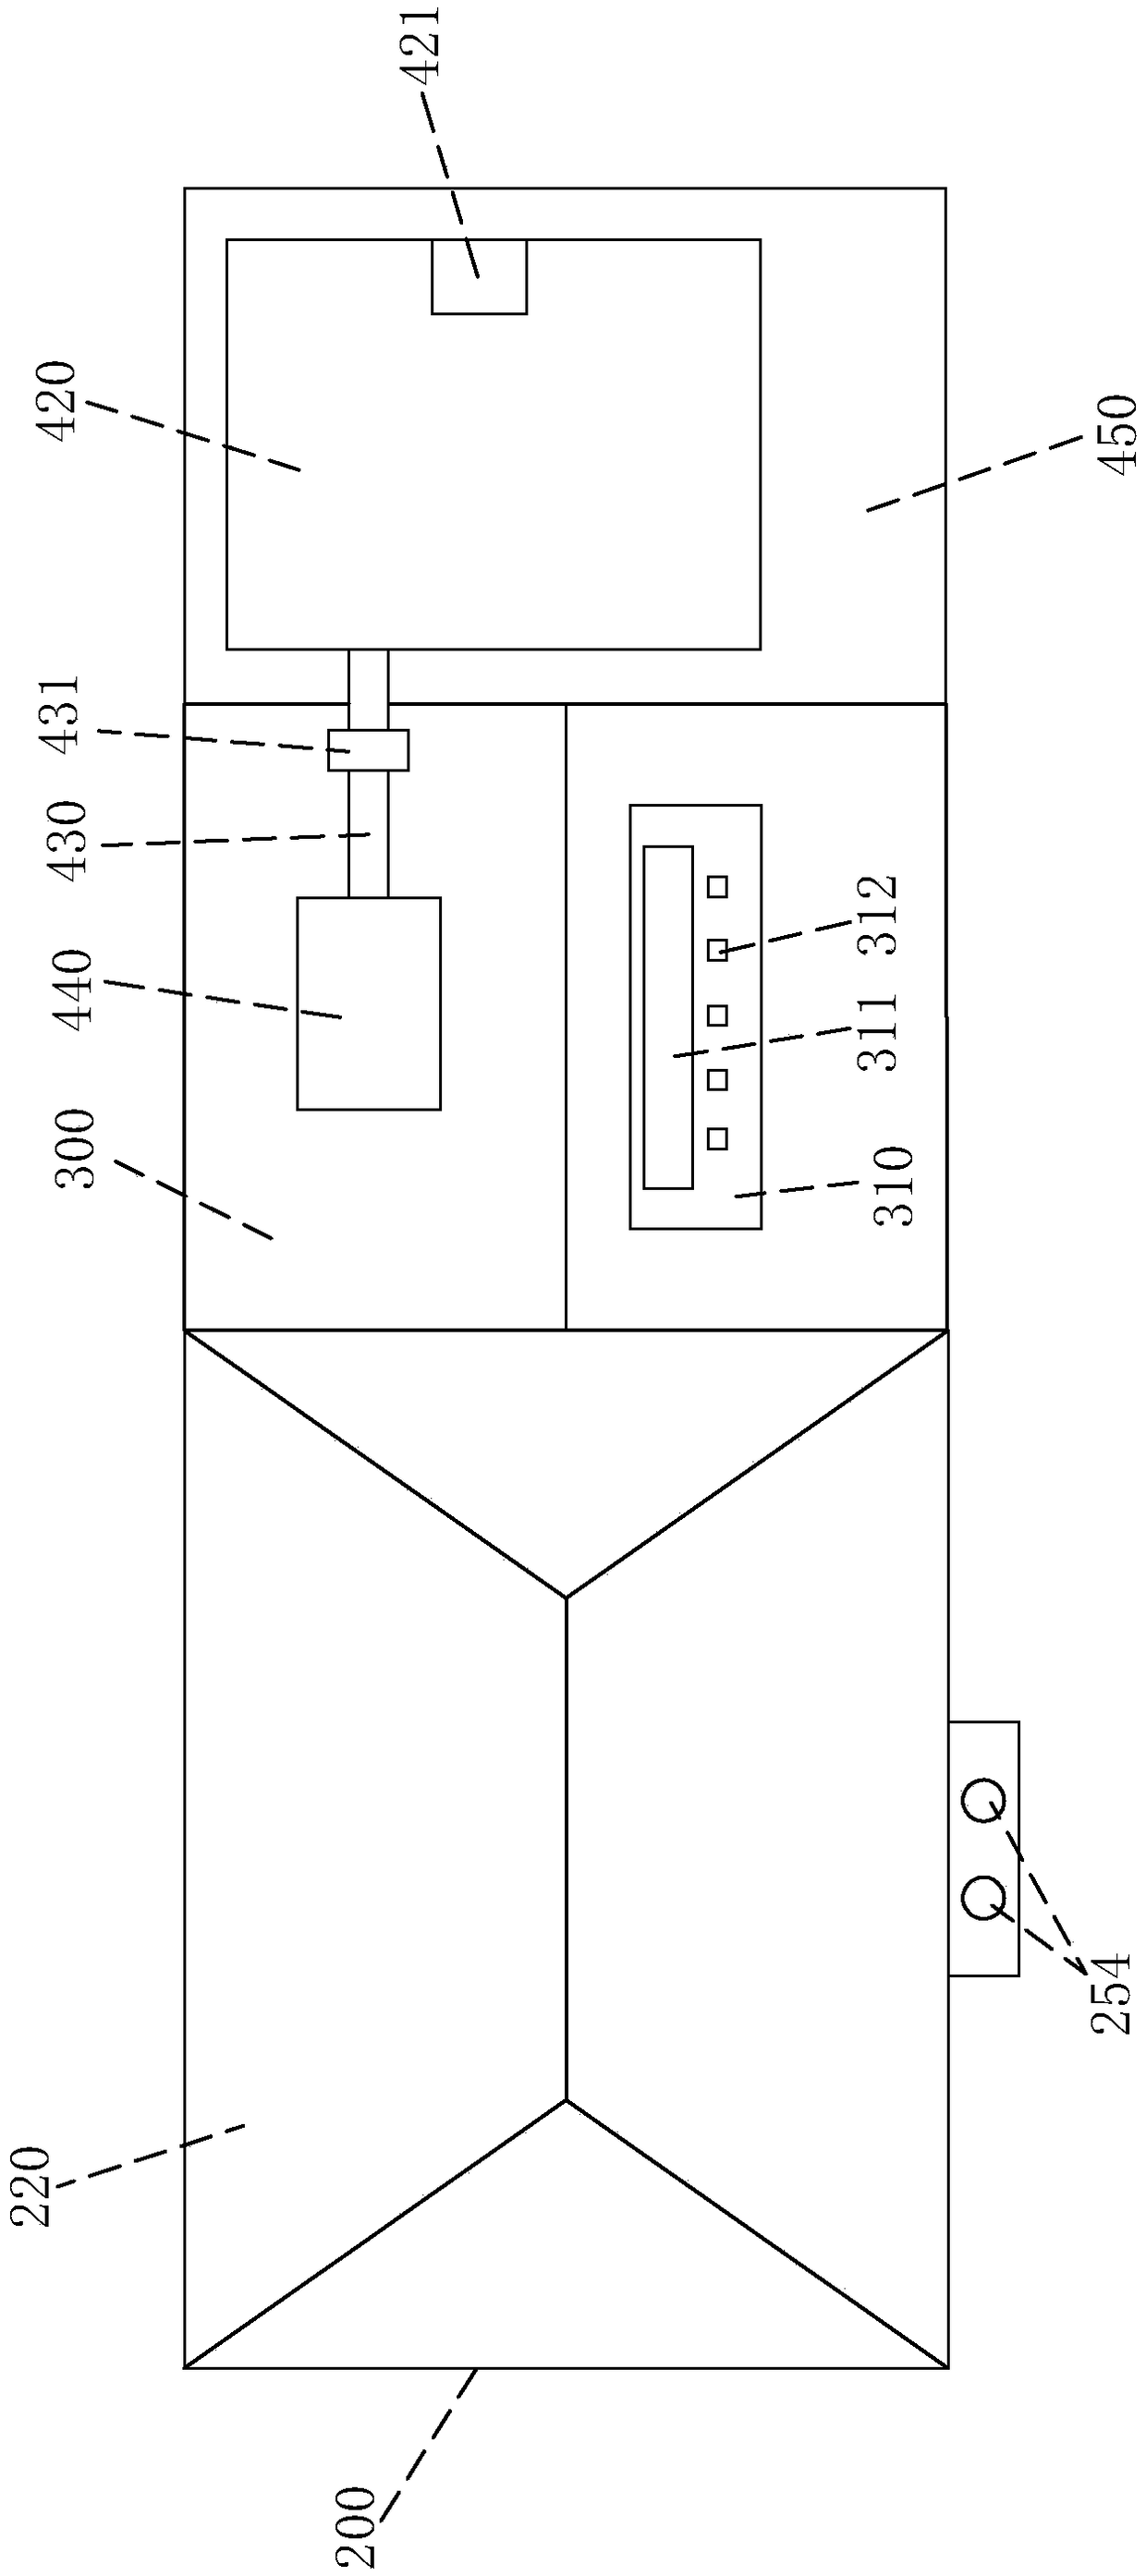 Salt spray test device capable of performing feeding automatically for detecting wall washer light